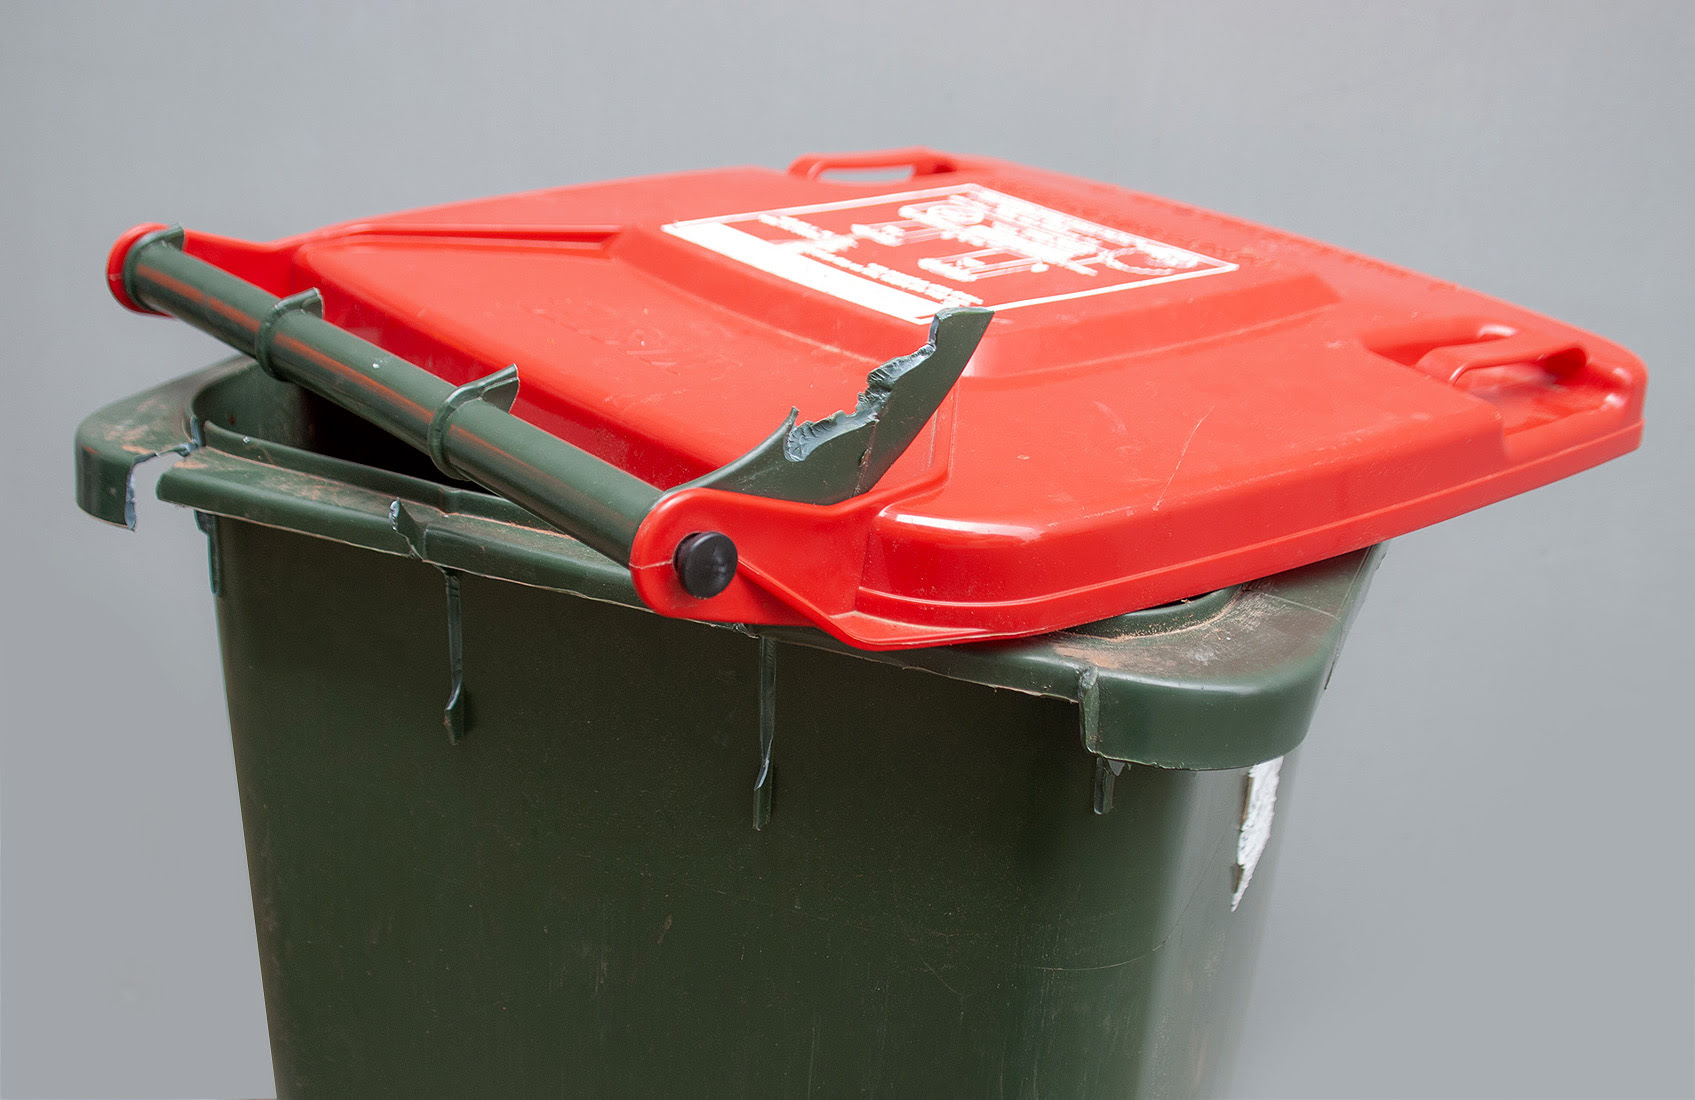 How To Request A New Recycling Bin